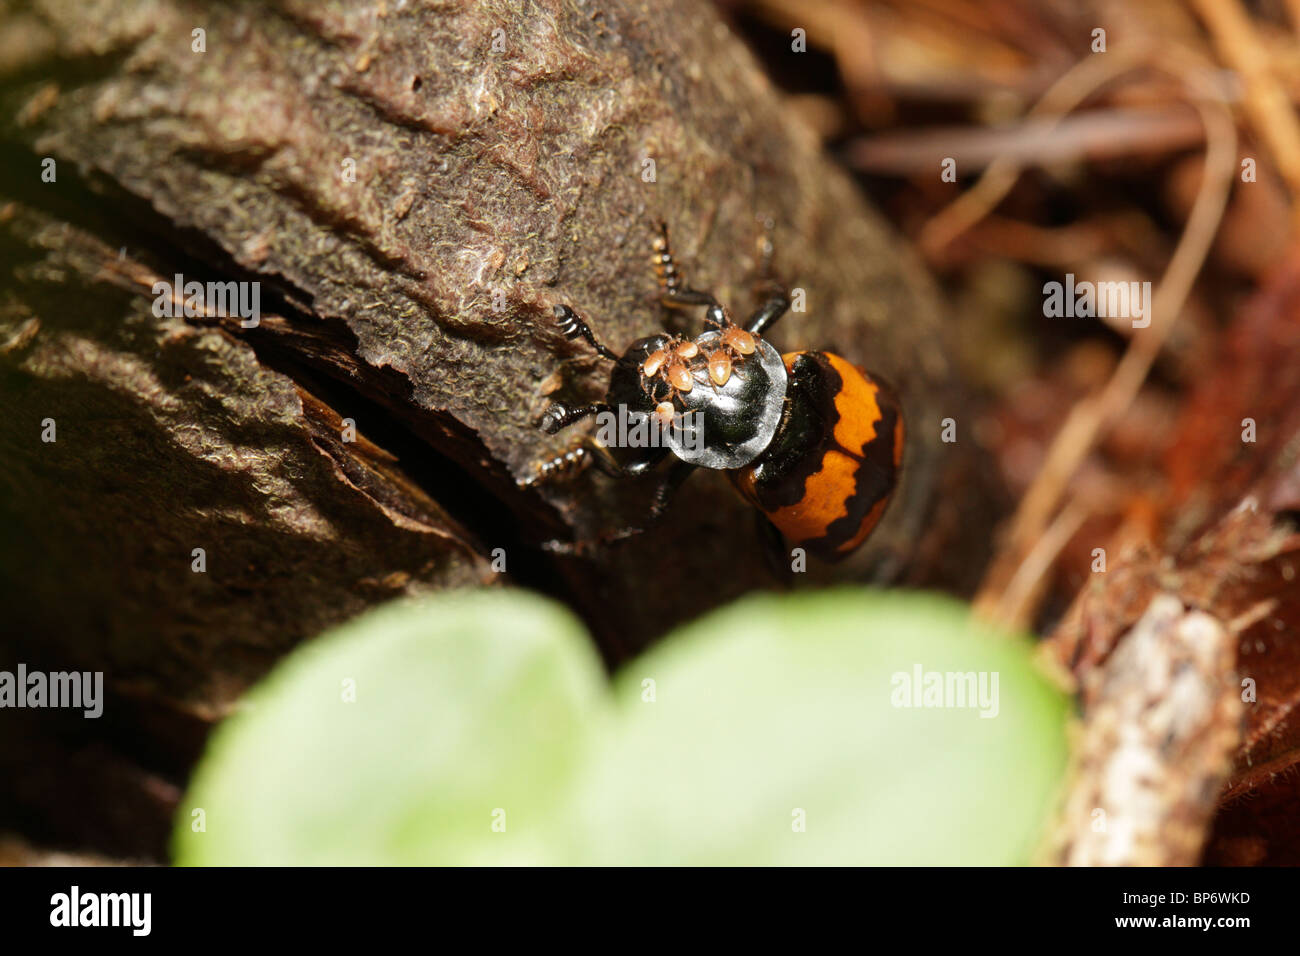 Necrophorus vespilloides, a burying beetle. This beetle carries mites that are symbiotic. Stock Photo